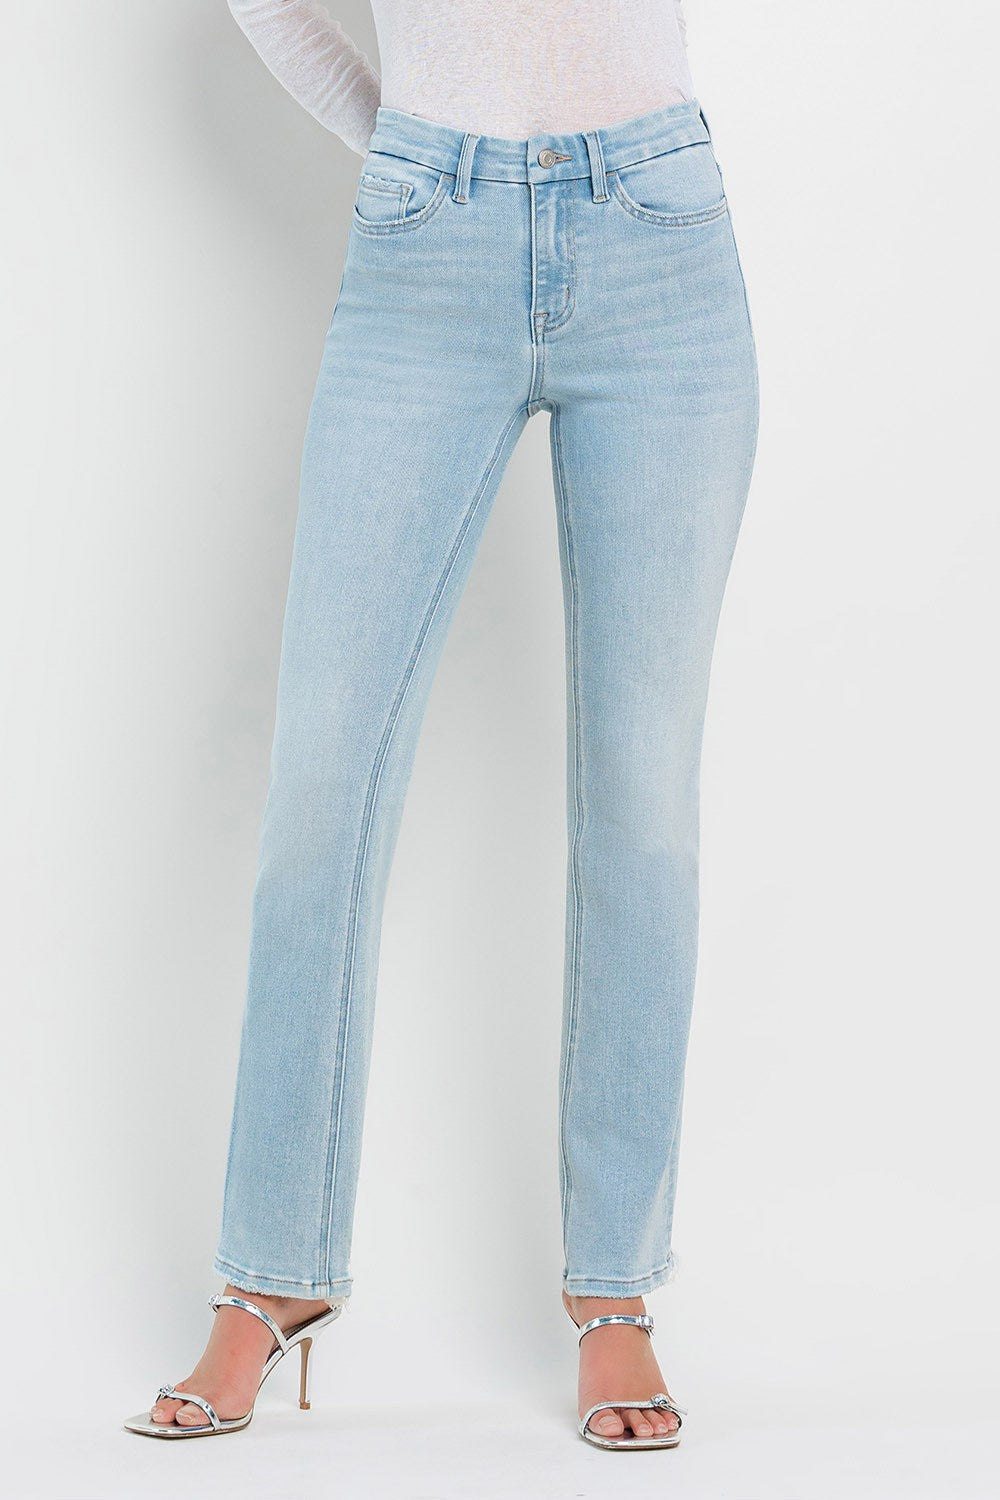 WELL-CONNECTED JEANS